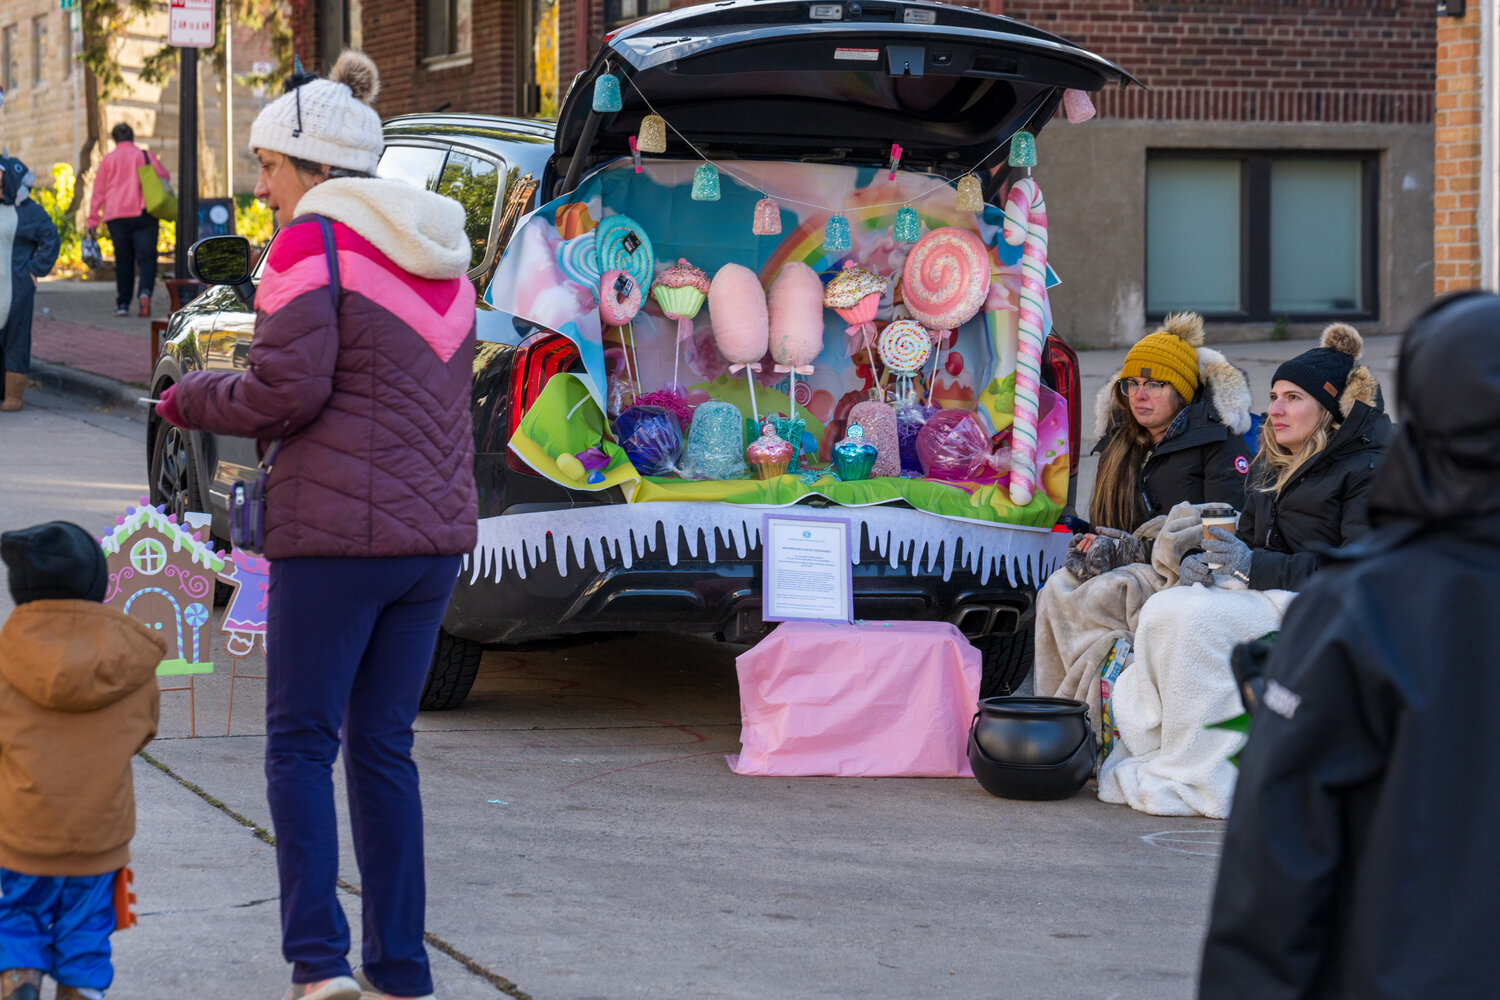 Many trunks were decorated for the Candy Crawl in downtown Hastings on Saturday. The businesses that operate outside of the downtown area did a great job joining the downtown event and decorating their trunks to welcome trick-or-treaters.